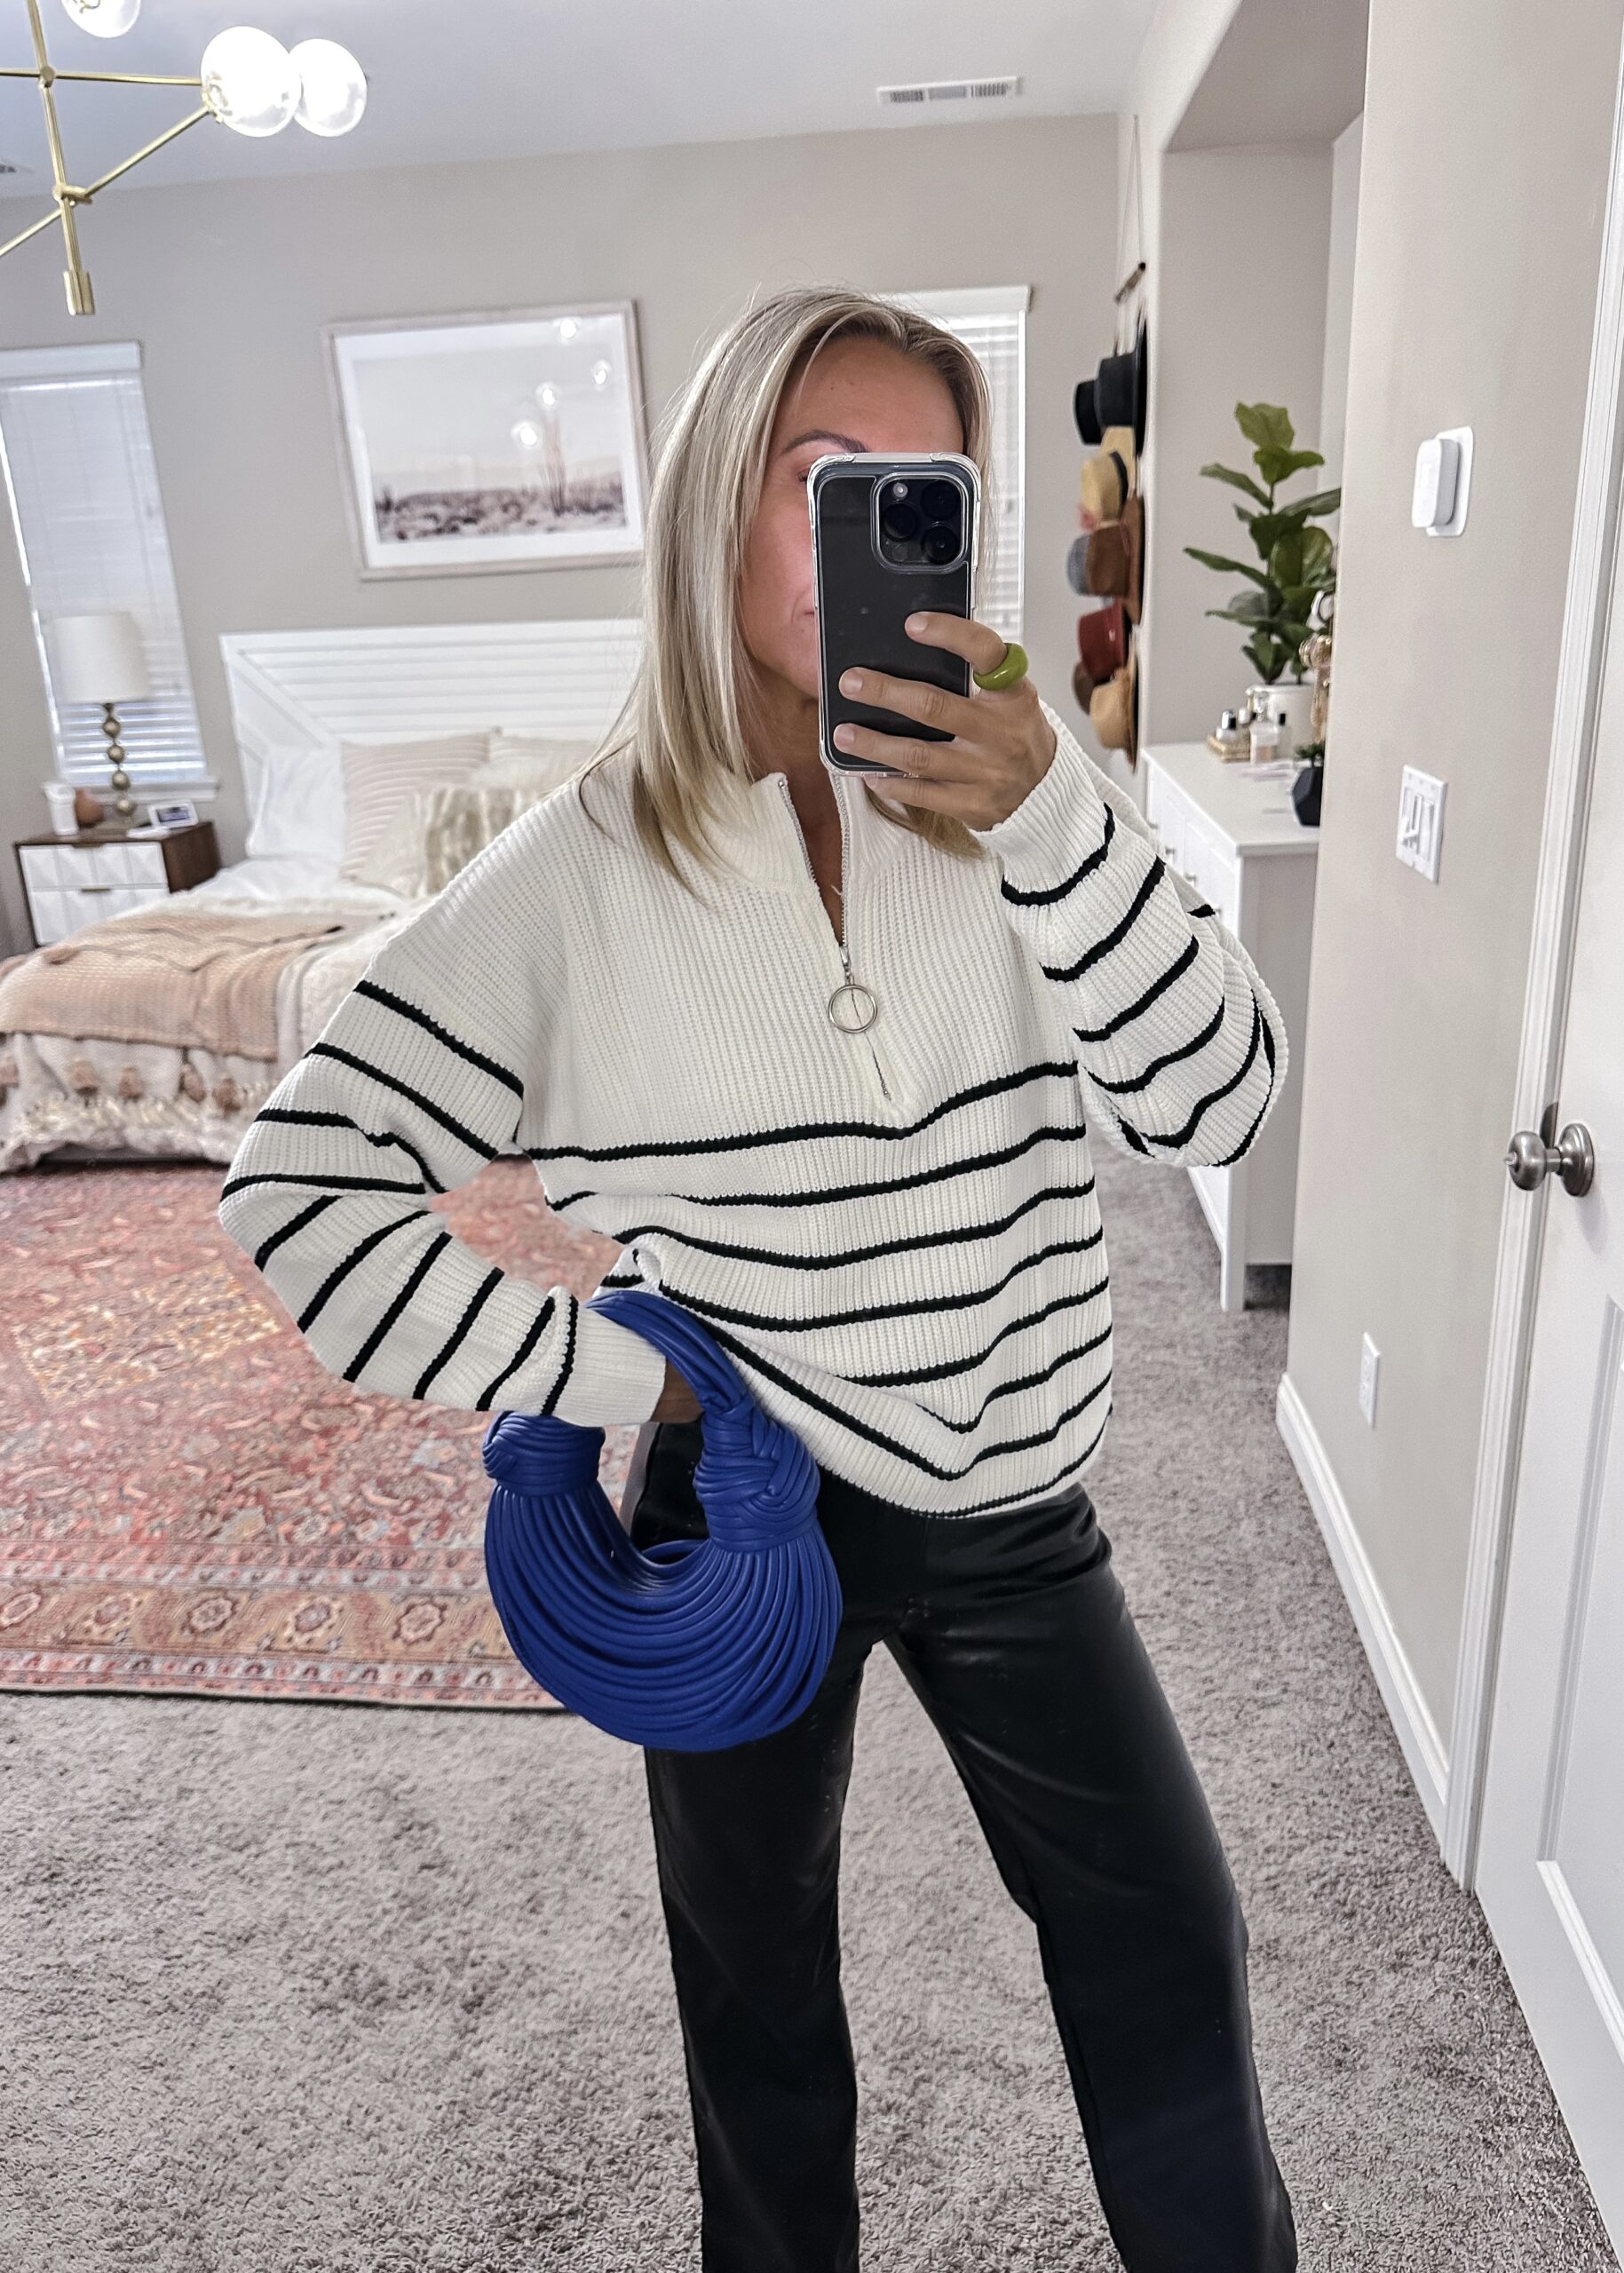 What I’ve been wearing lately from Amazon-Jaclyn De Leon Style. Sharing casual chic Amazon outfits that I'm loving. Amazon favorites include a wide leg trouser, faux leather pants, a loungewear set, and my favorite stripe sweater.